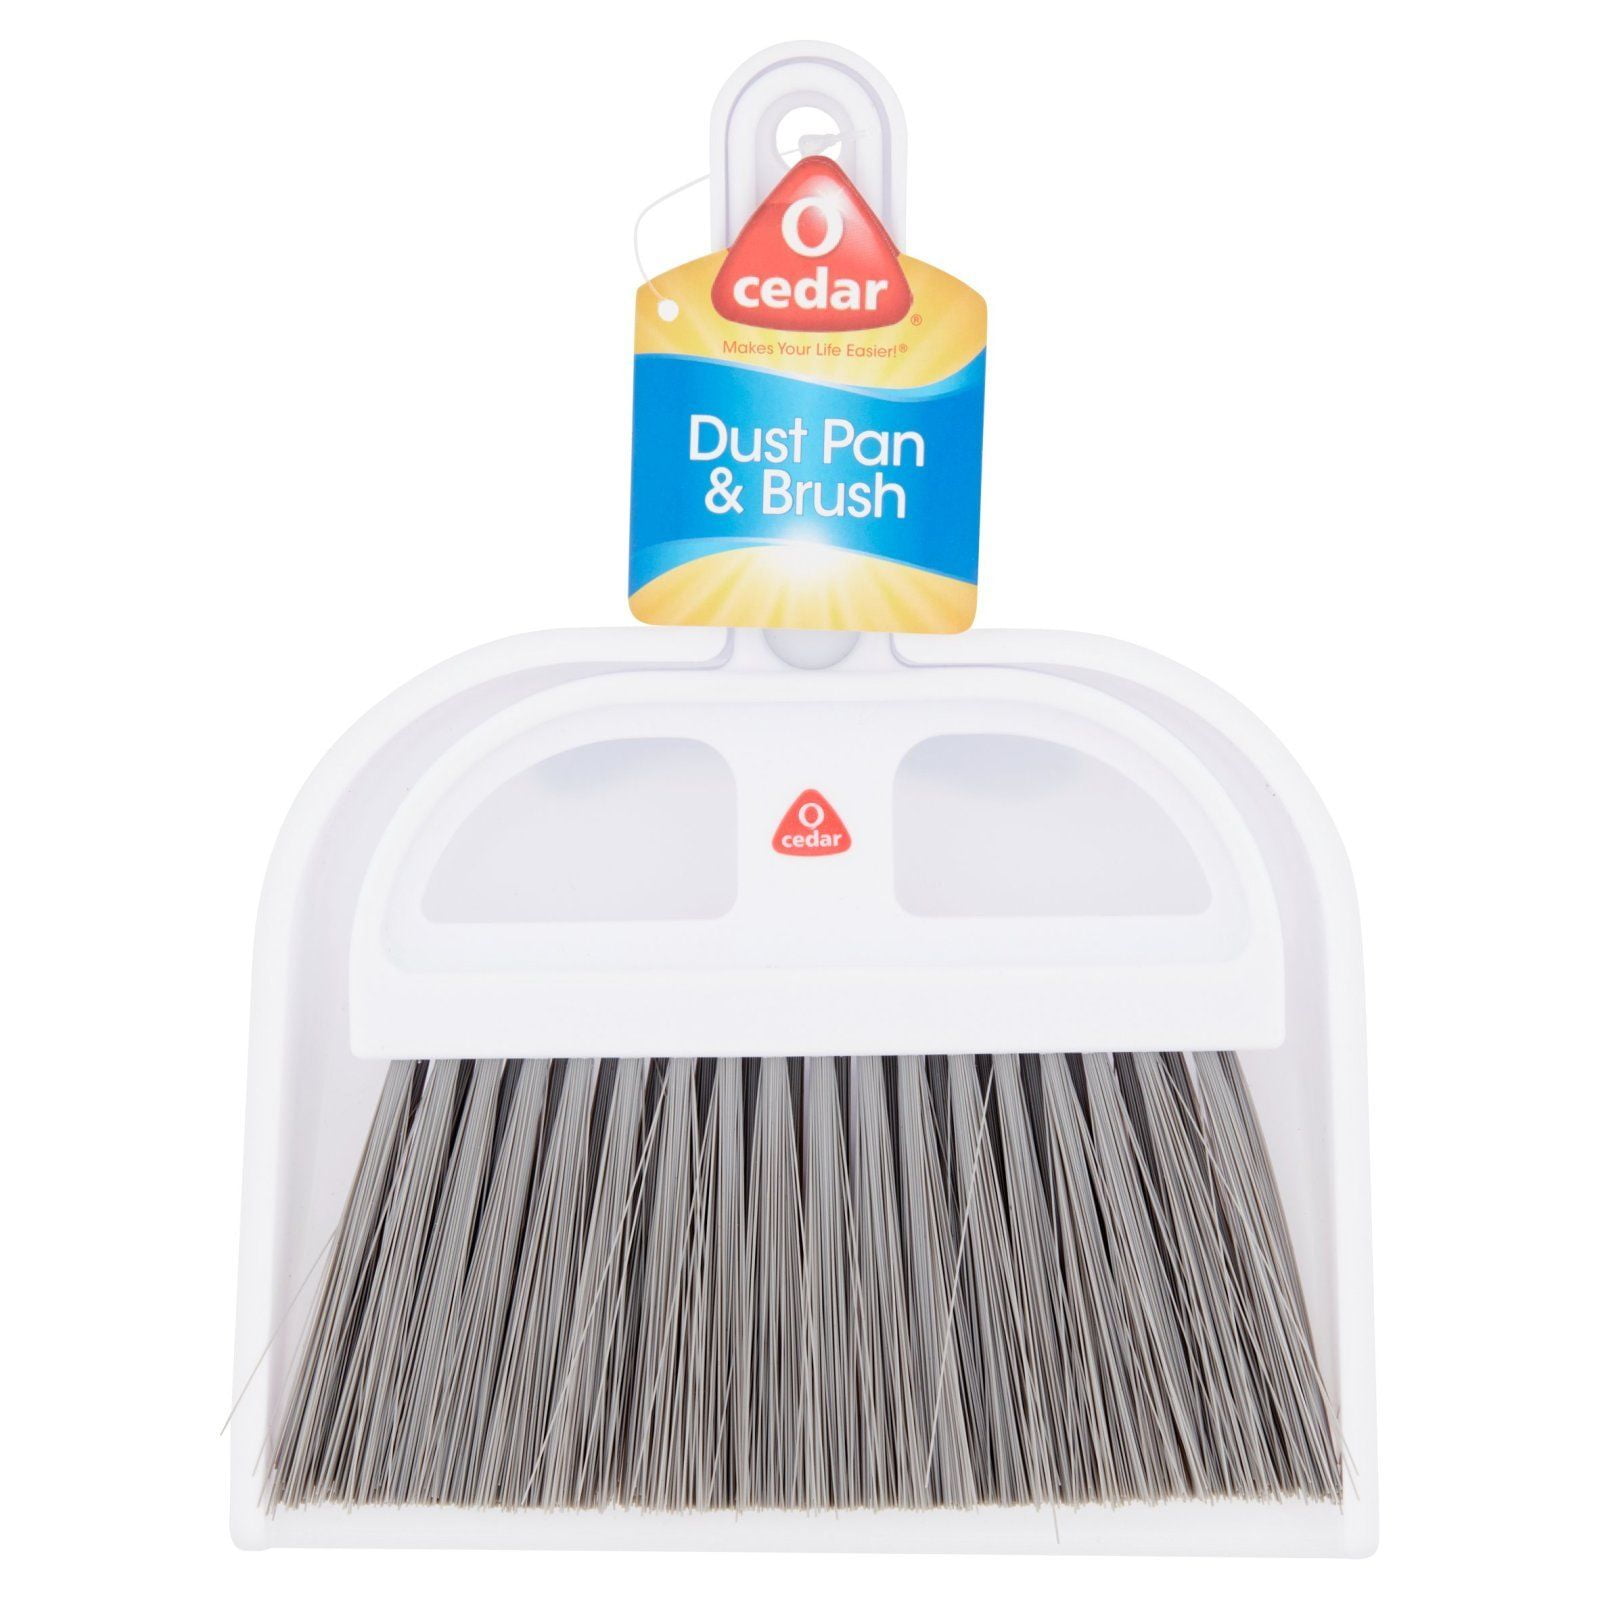 Dust Pans and Brush Sets Pack of 3 BULK PURCHASE BARGAIN PRICE NEW IN STOCK 